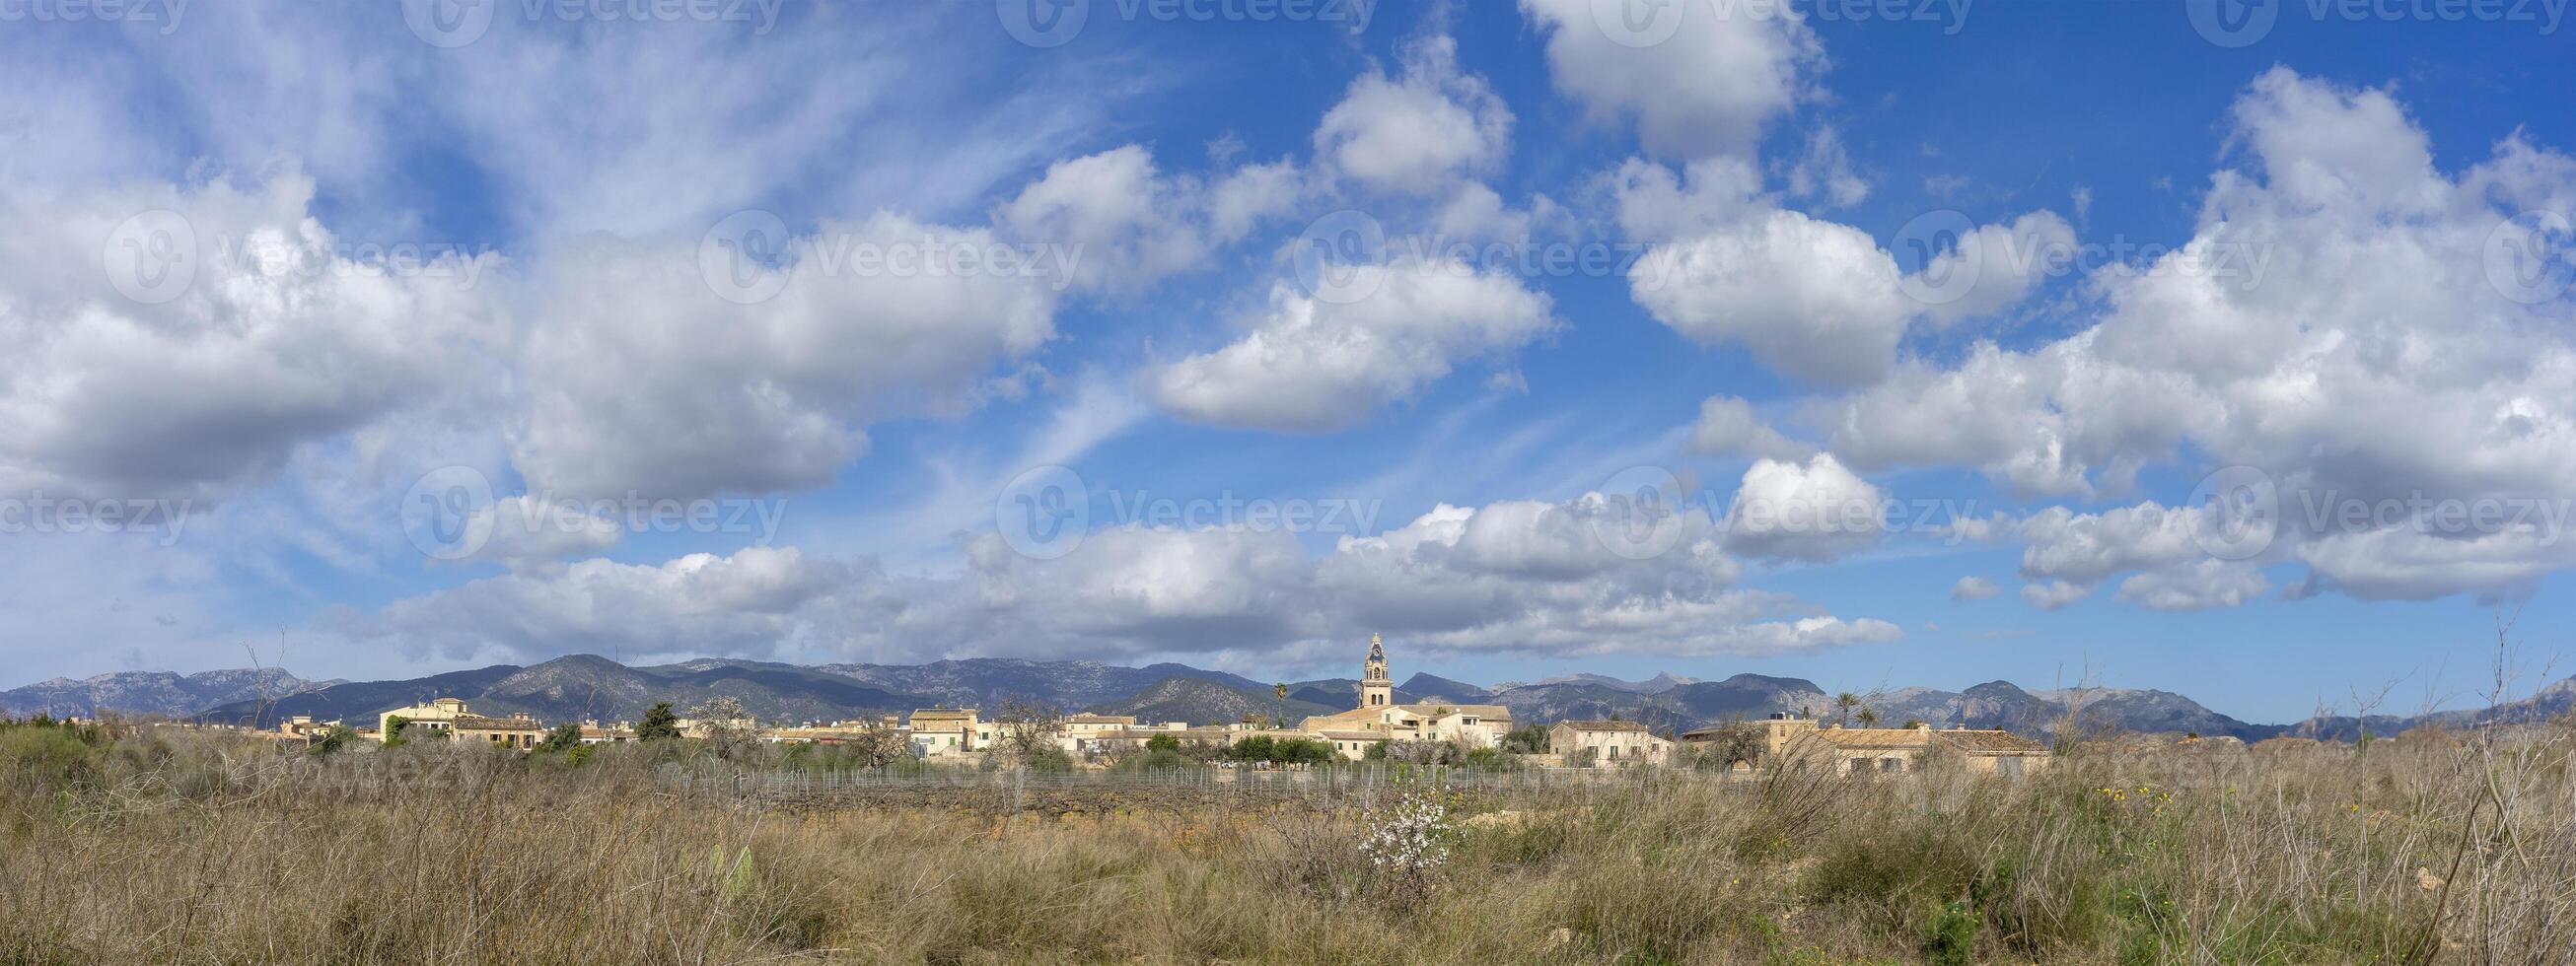 Expansive Sky over the Tranquil Village of Consell, Mallorca photo